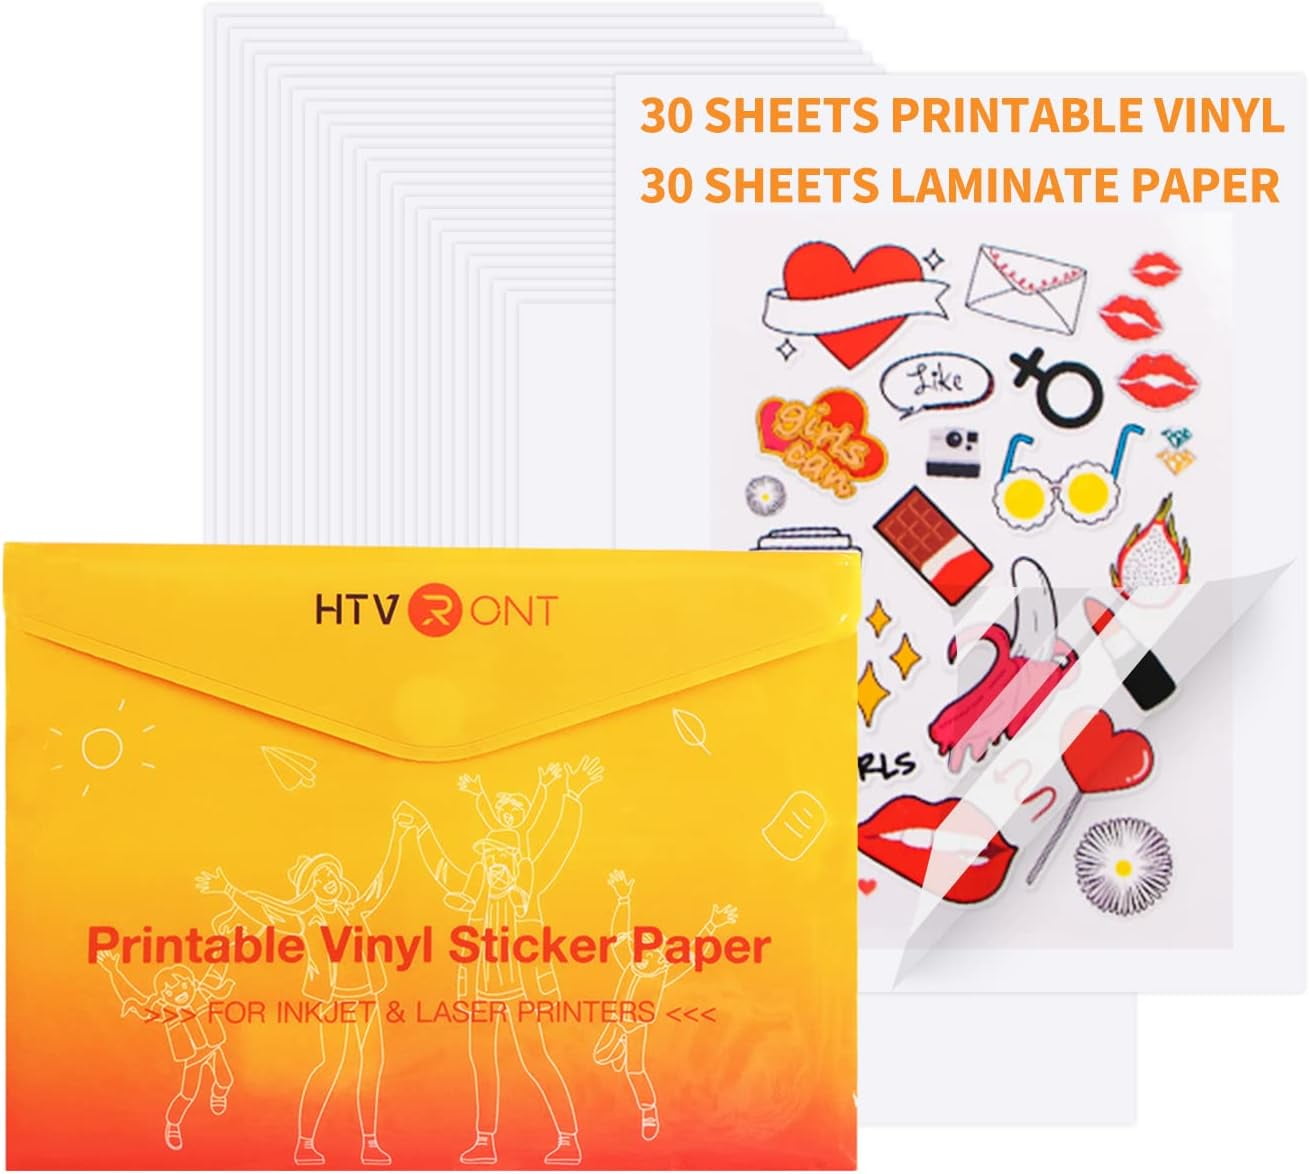 Coupon Stackers - TOO! Groups Authorized  Linker ID Code:  I-DK0XR3YBP081 PRICE DROP ⬇️⬇️⬇️⬇️ NO CODE NEEDED‼️ [JOYEZA Premium  Printable Vinyl Sticker Paper for Inkjet Printer - 20 Sheets Matte White  Waterproof